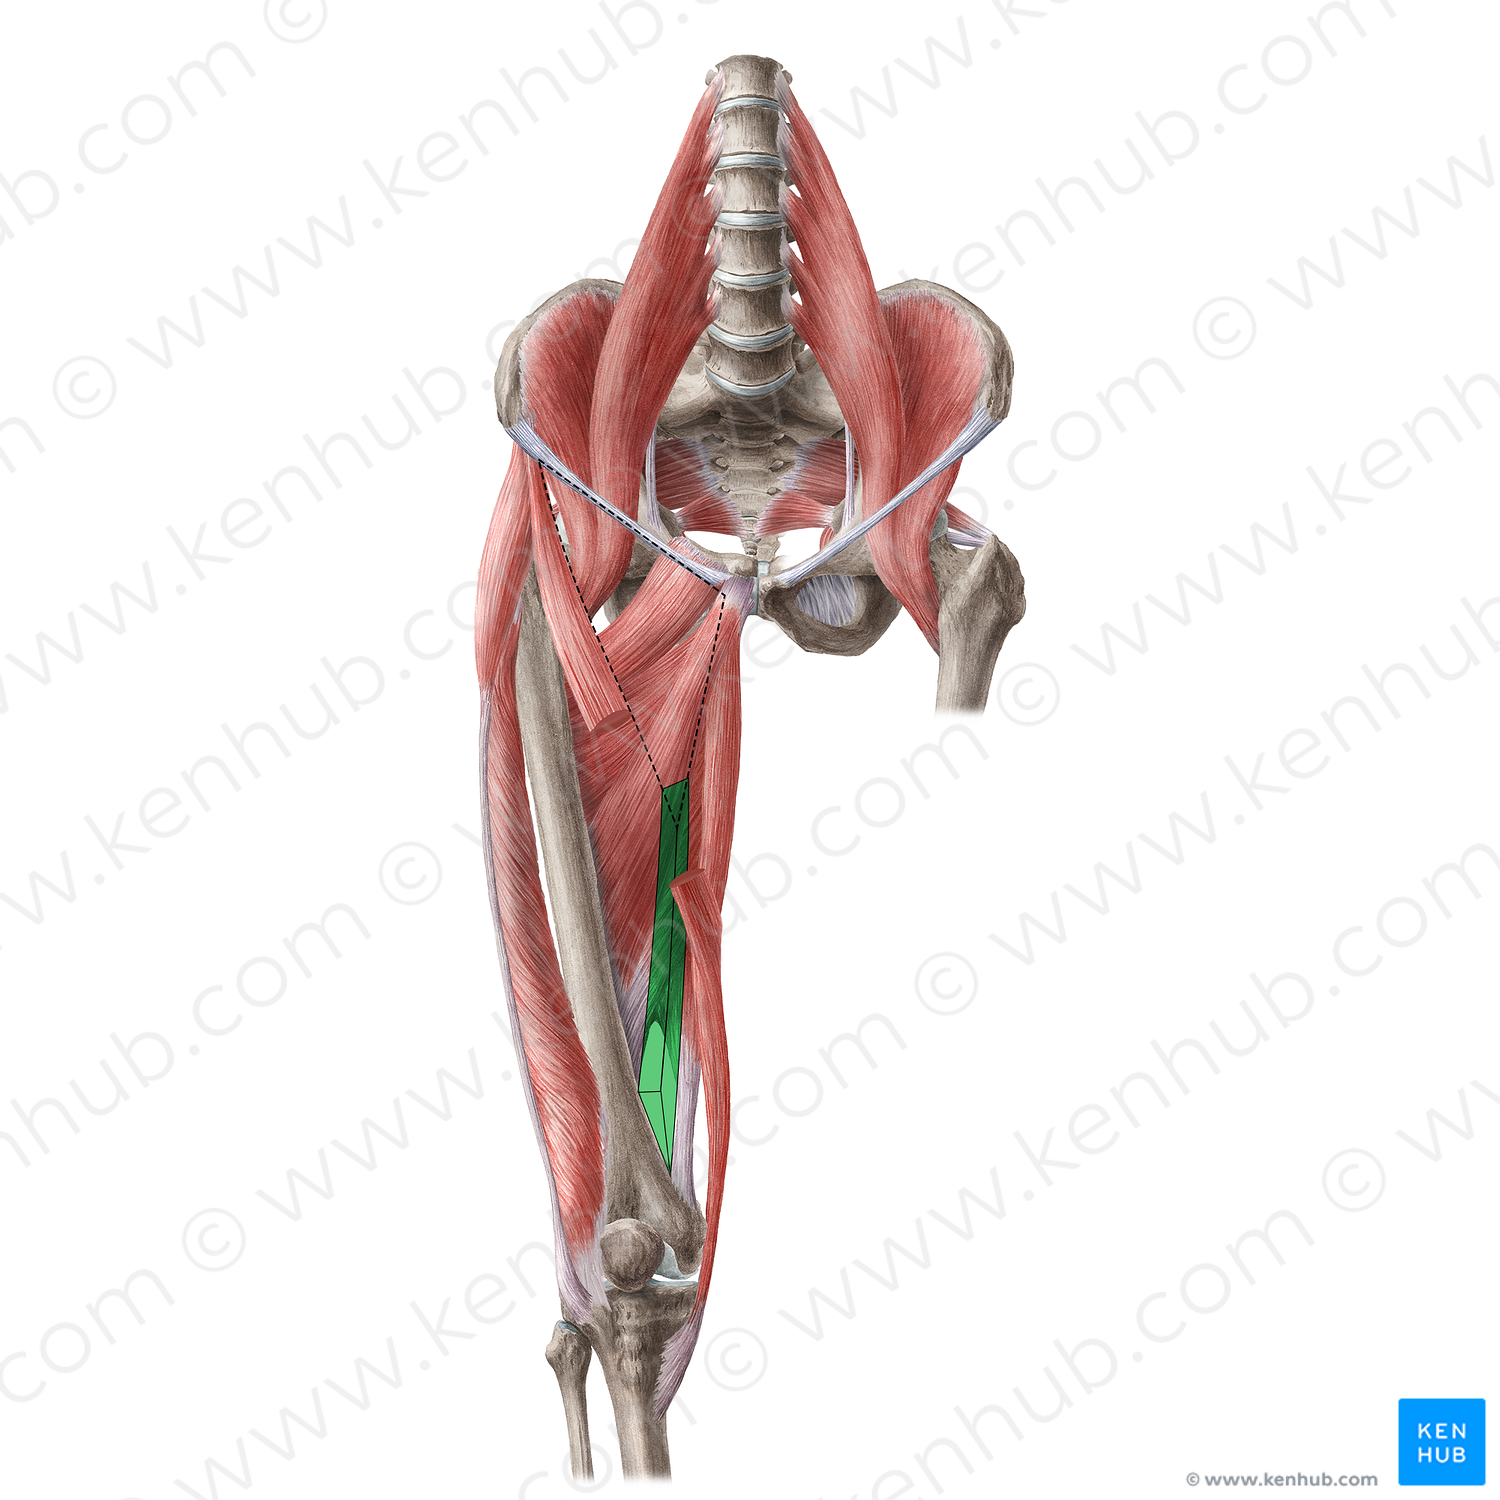 Adductor canal (#21692)